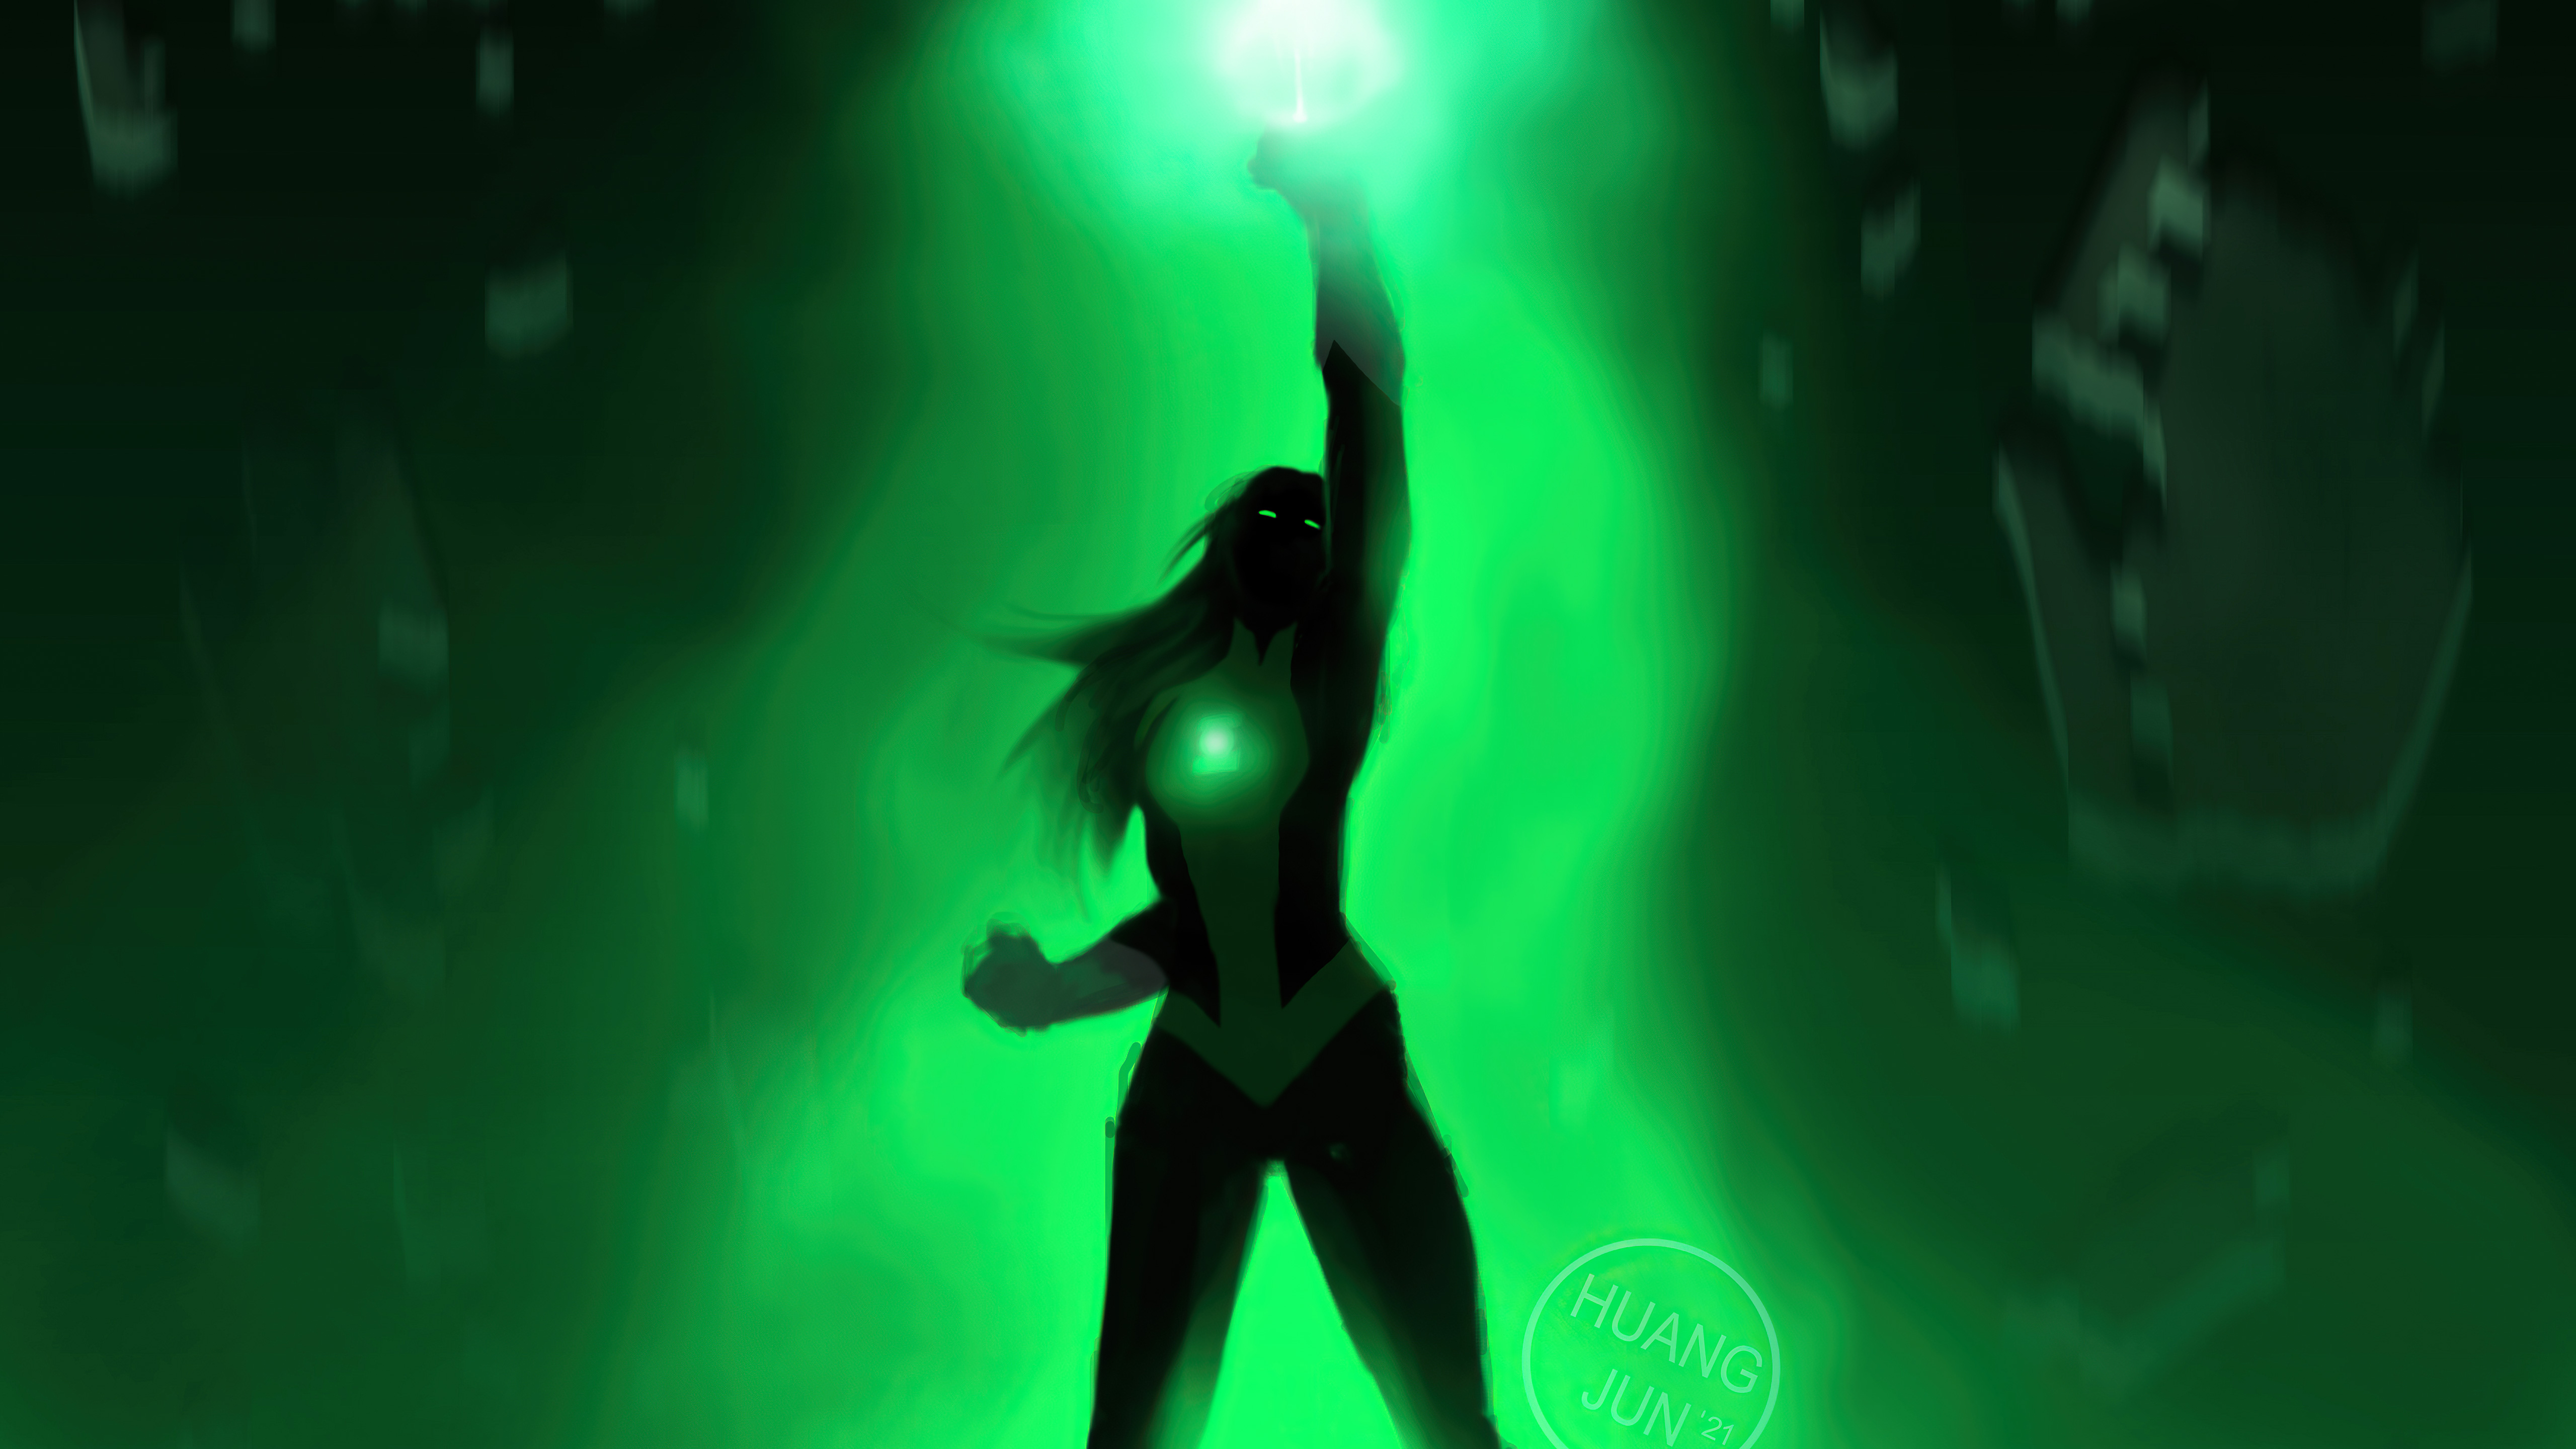 Jessica cruz green lantern k hd tv shows k wallpapers images backgrounds photos and pictures